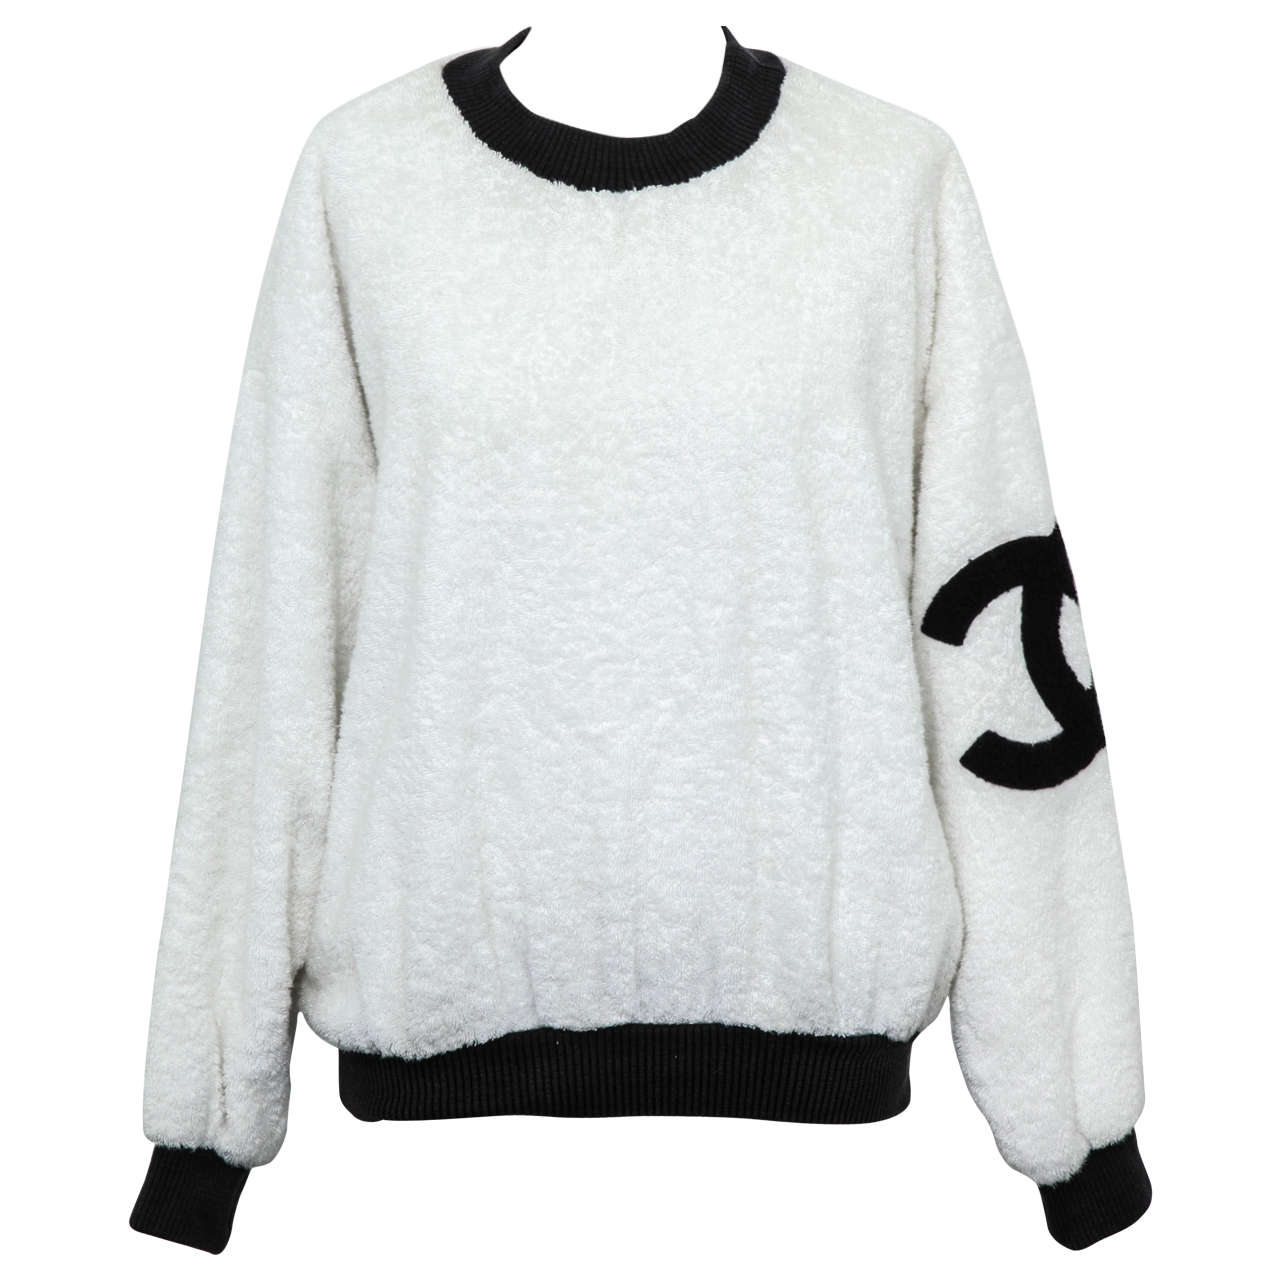 Vintage Chanel Sweat Shirt Sweater with Iconic CC 